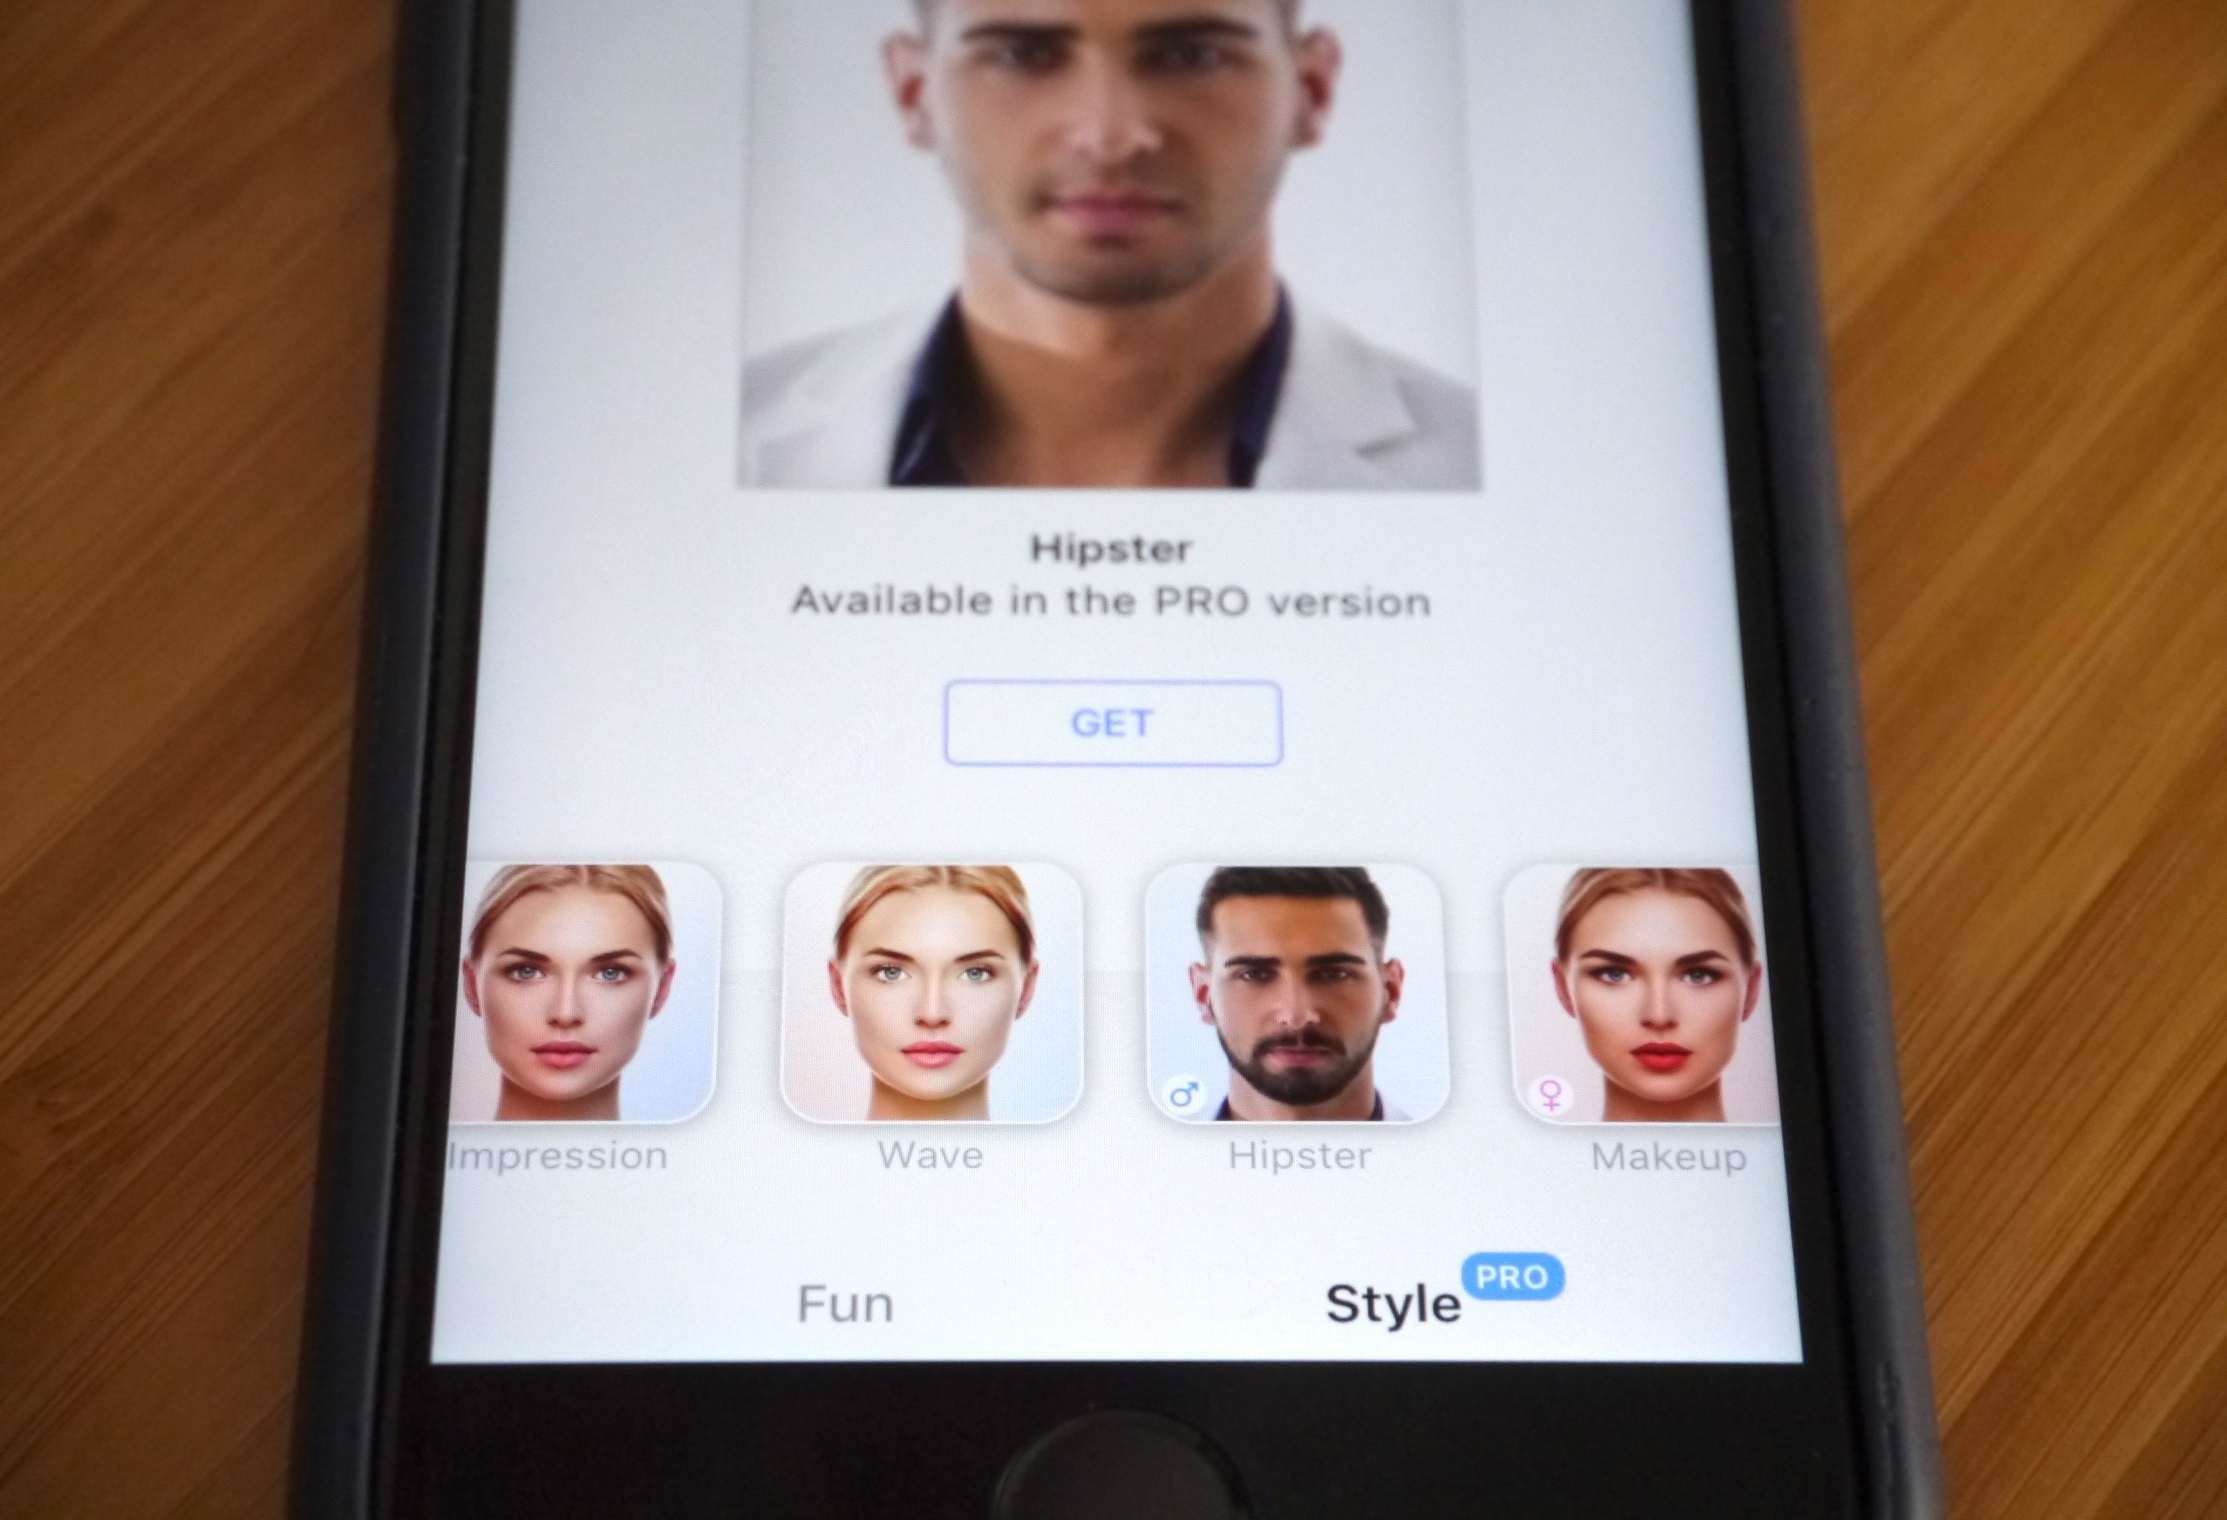 FaceApp responds to privacy concerns | TechCrunch